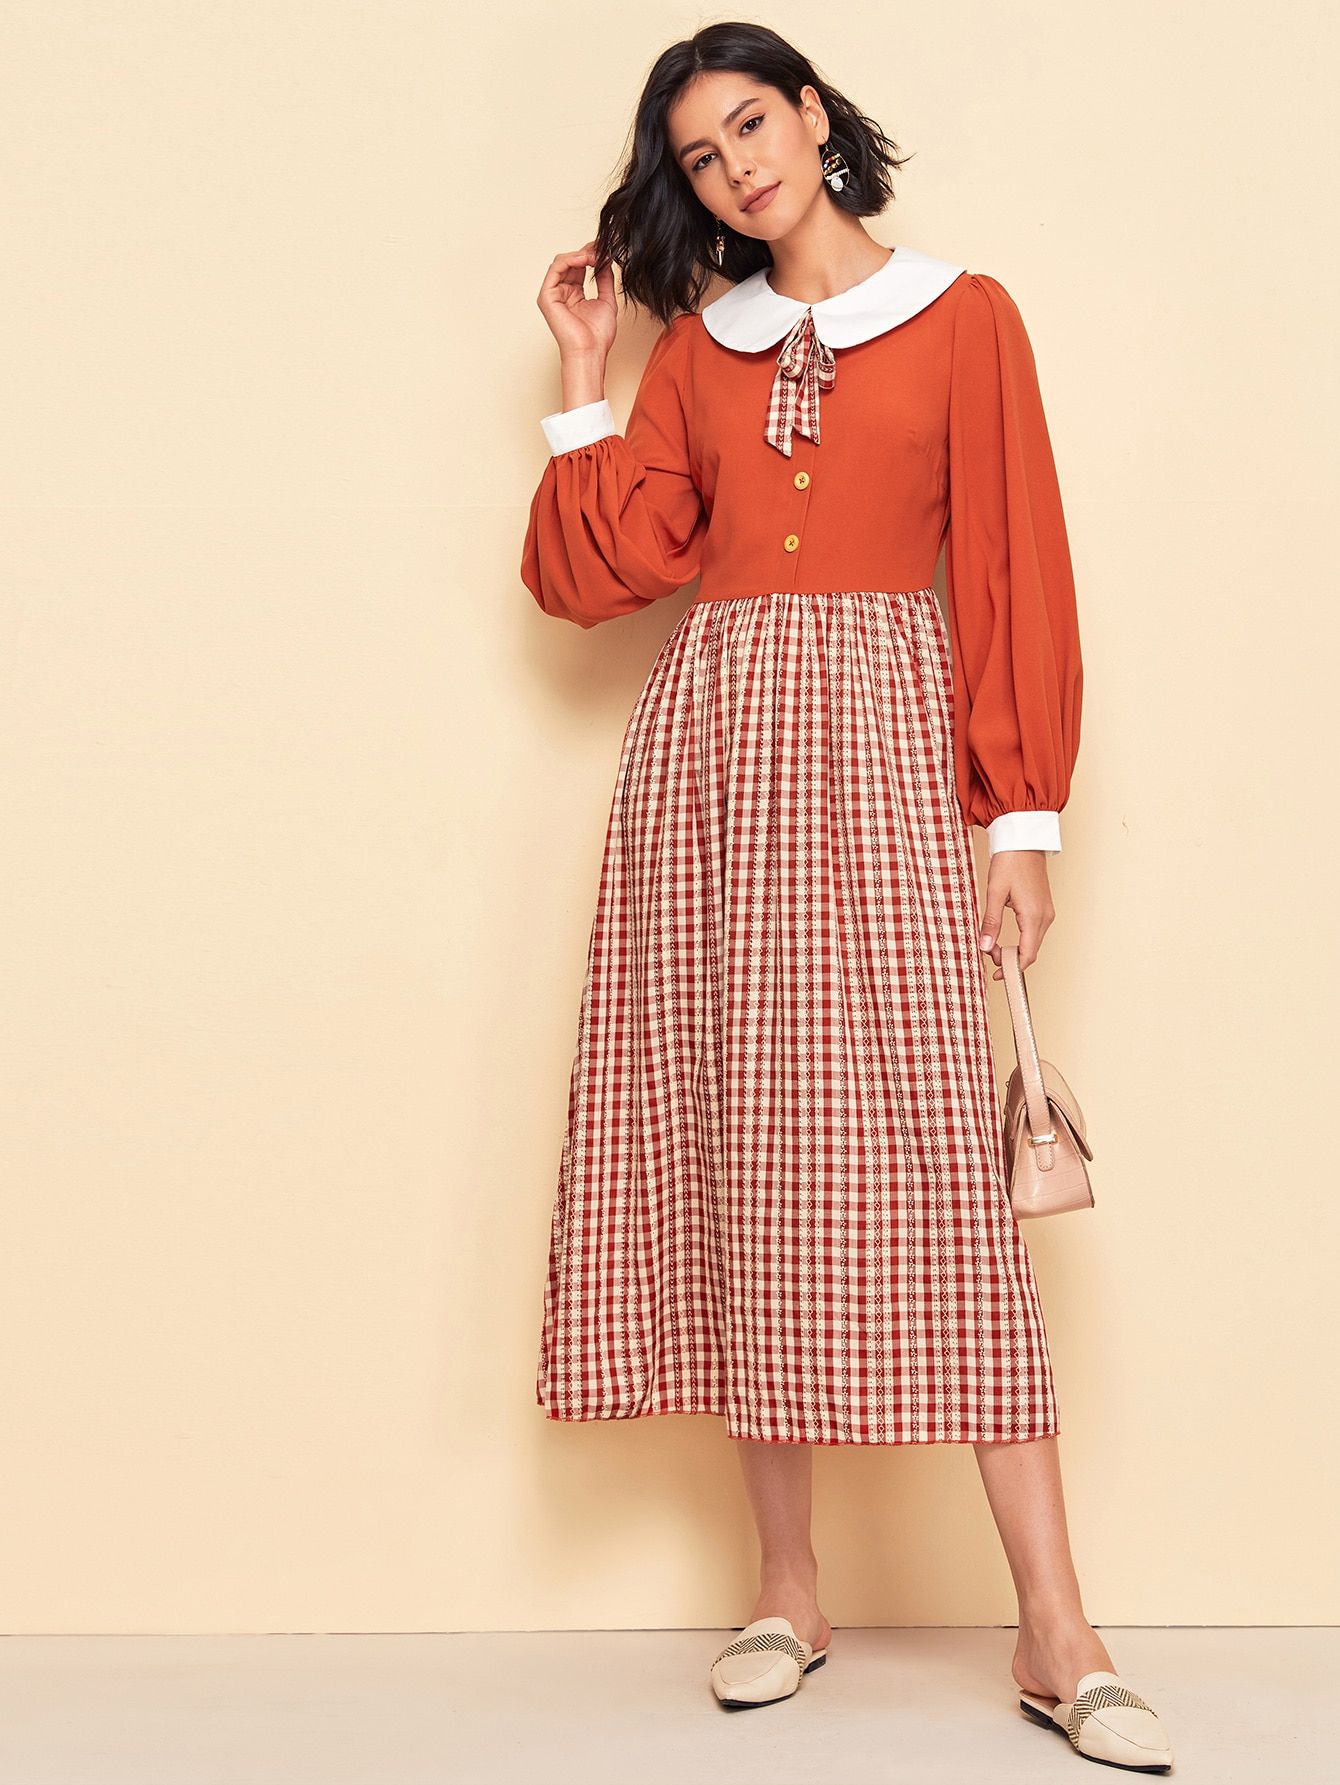 Plus Peter Pan Collar Tie Neck Buttoned Front Gingham Dress | SHEIN